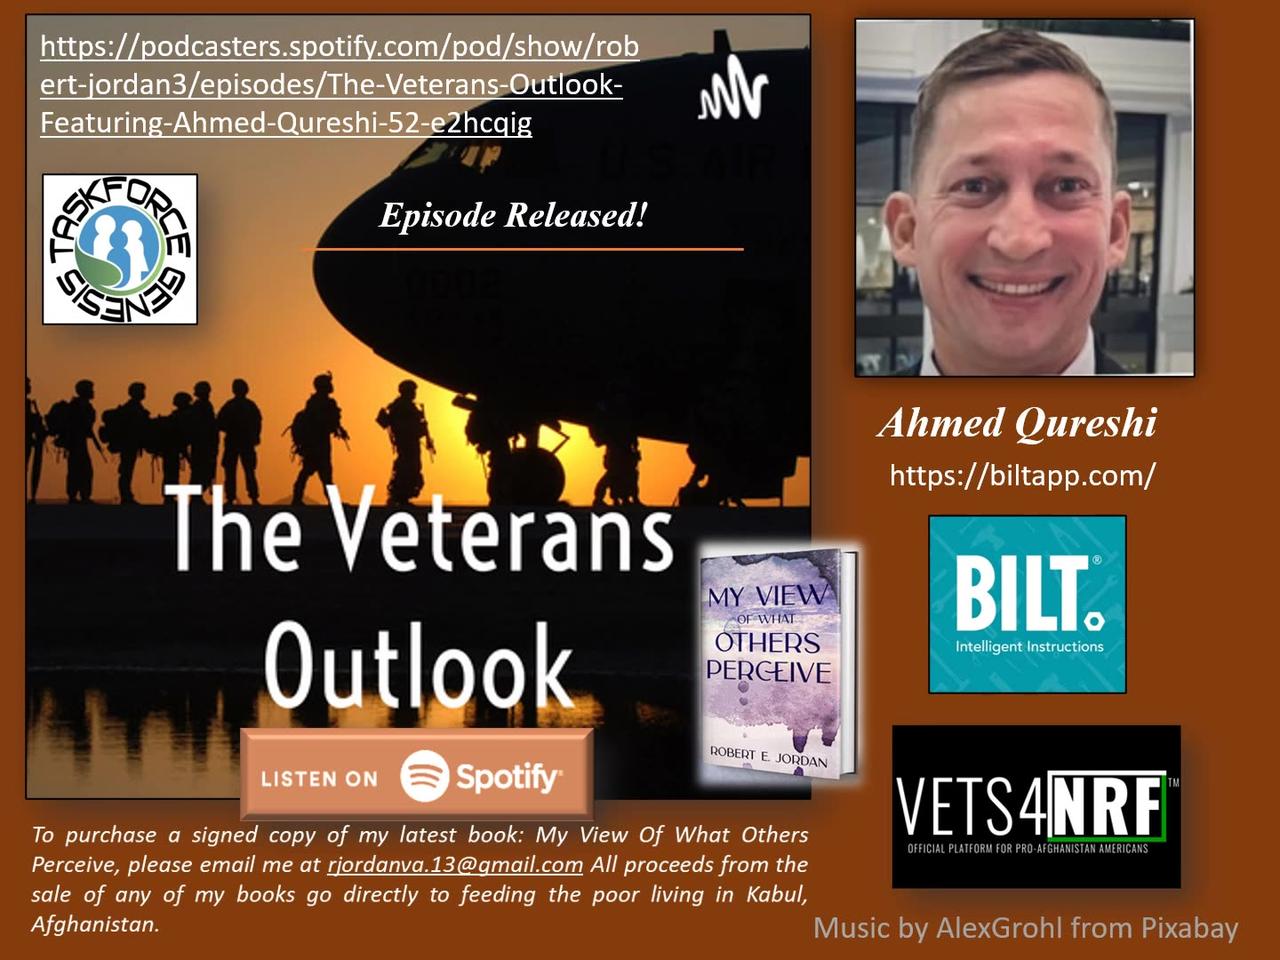 The Veterans Outlook Podcast Featuring Ahmed Qureshi (#52).